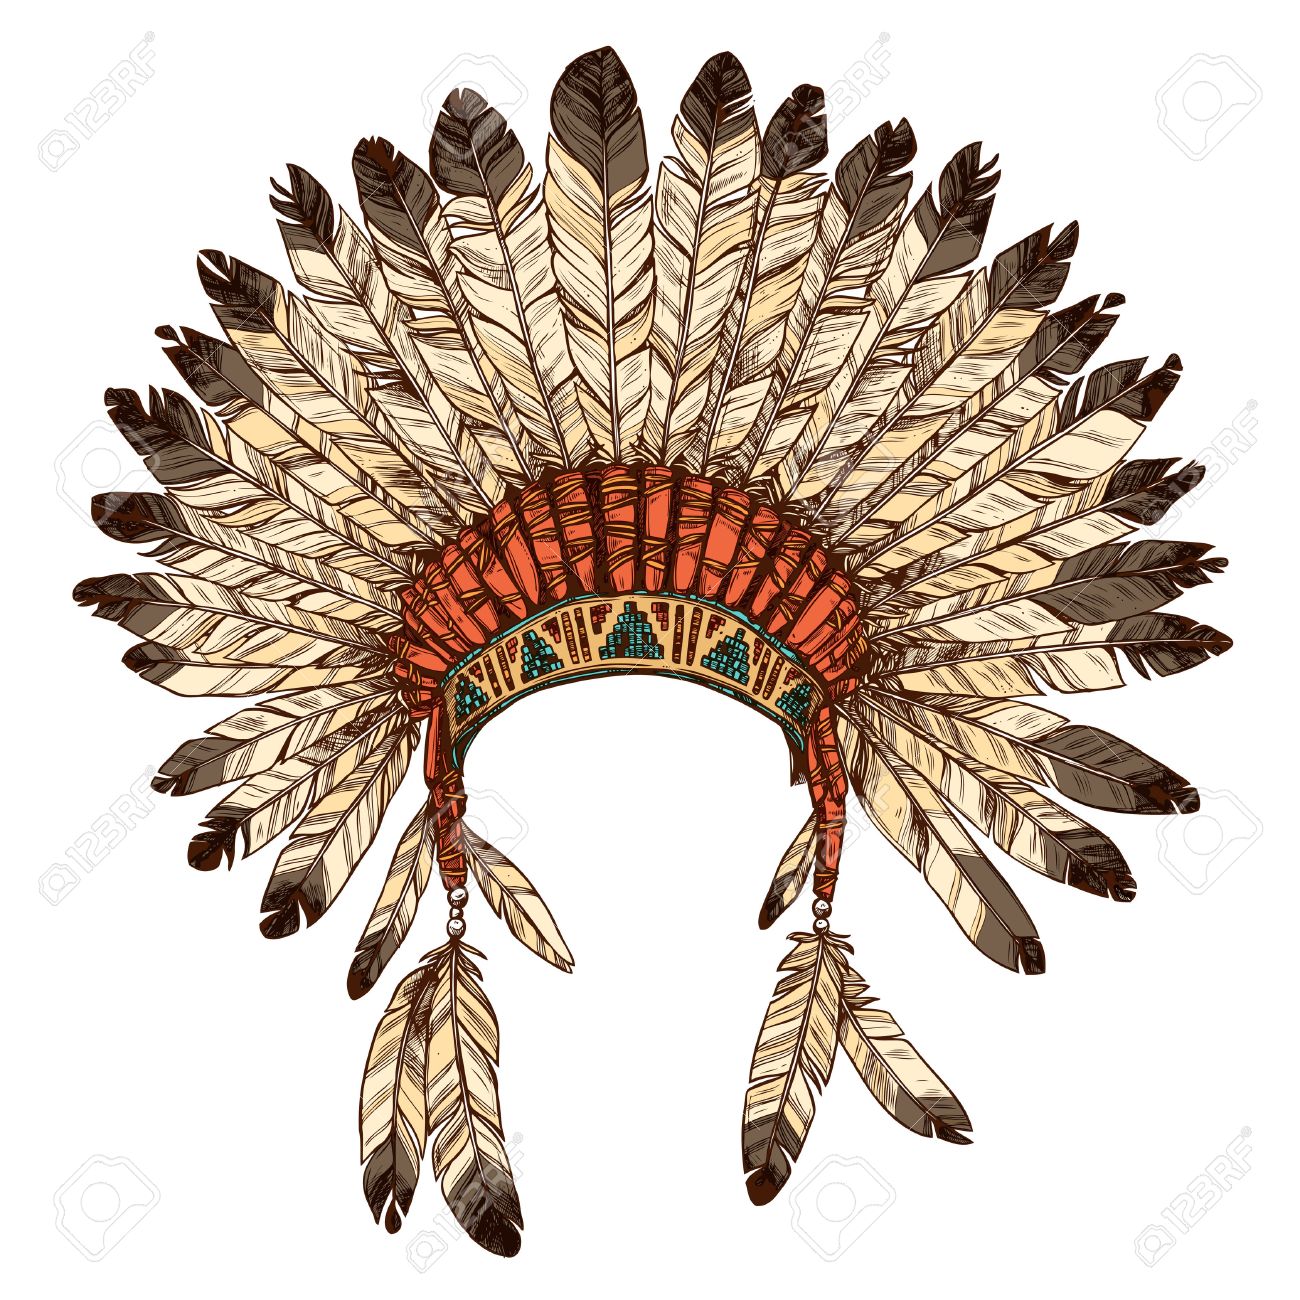 Indian Feathers Drawing at GetDrawings | Free download